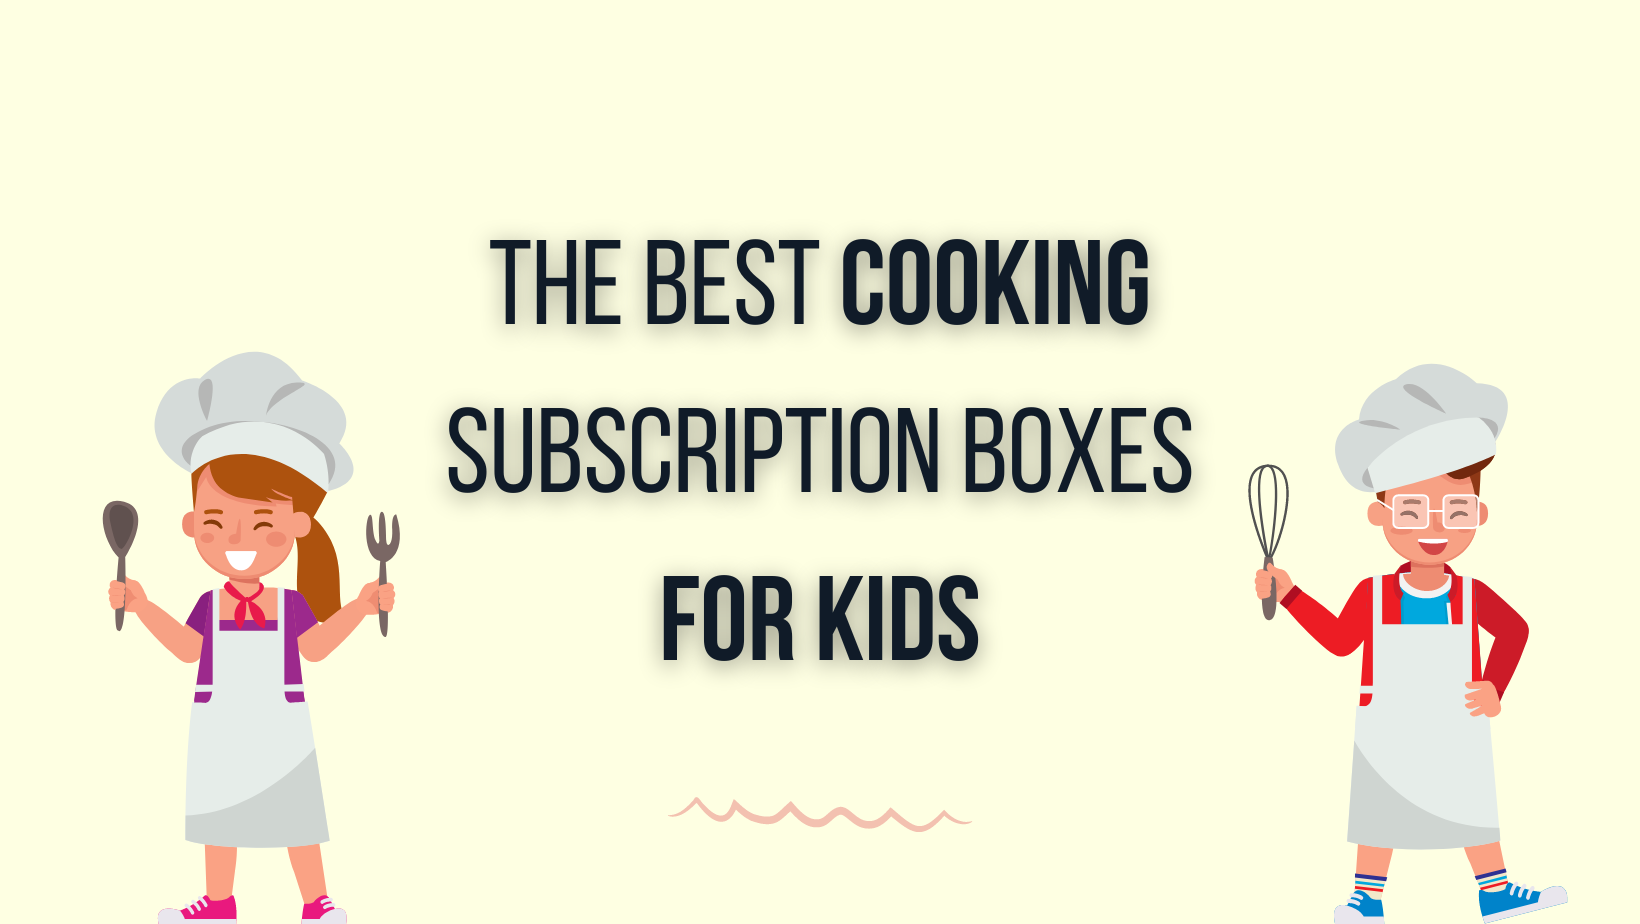 https://hellosubscription.com/wp-content/uploads/2023/03/bestkidscooking.png?quality=90&strip=all